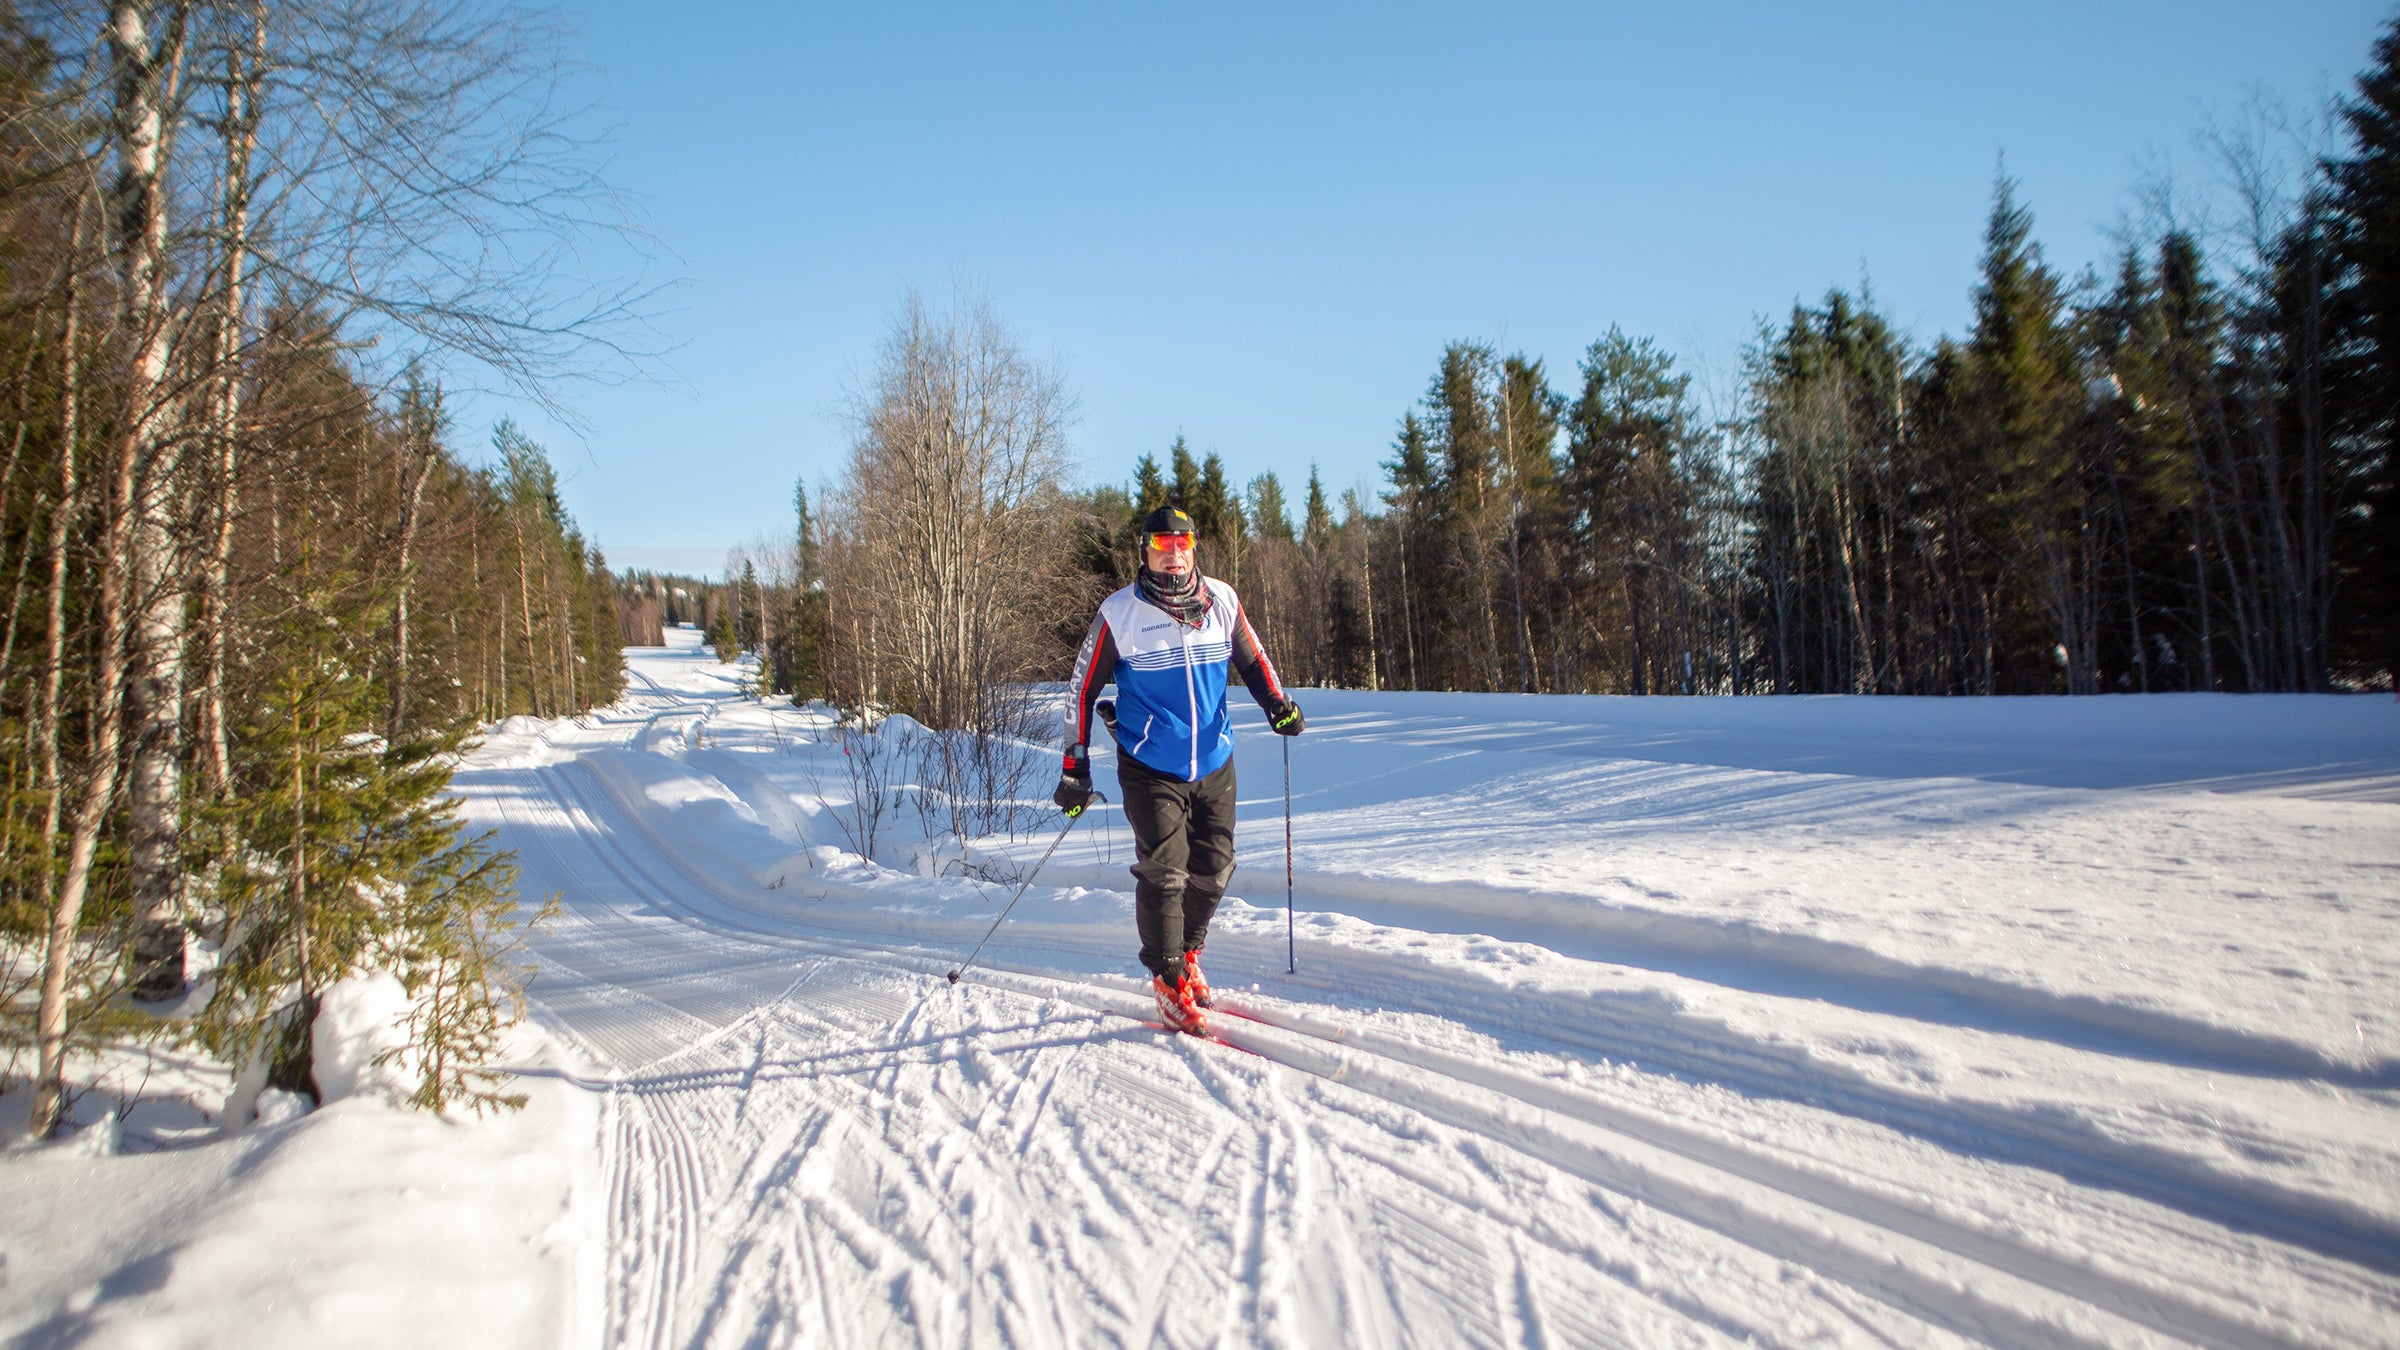 The Best Way to See Finland? Ski Finland.